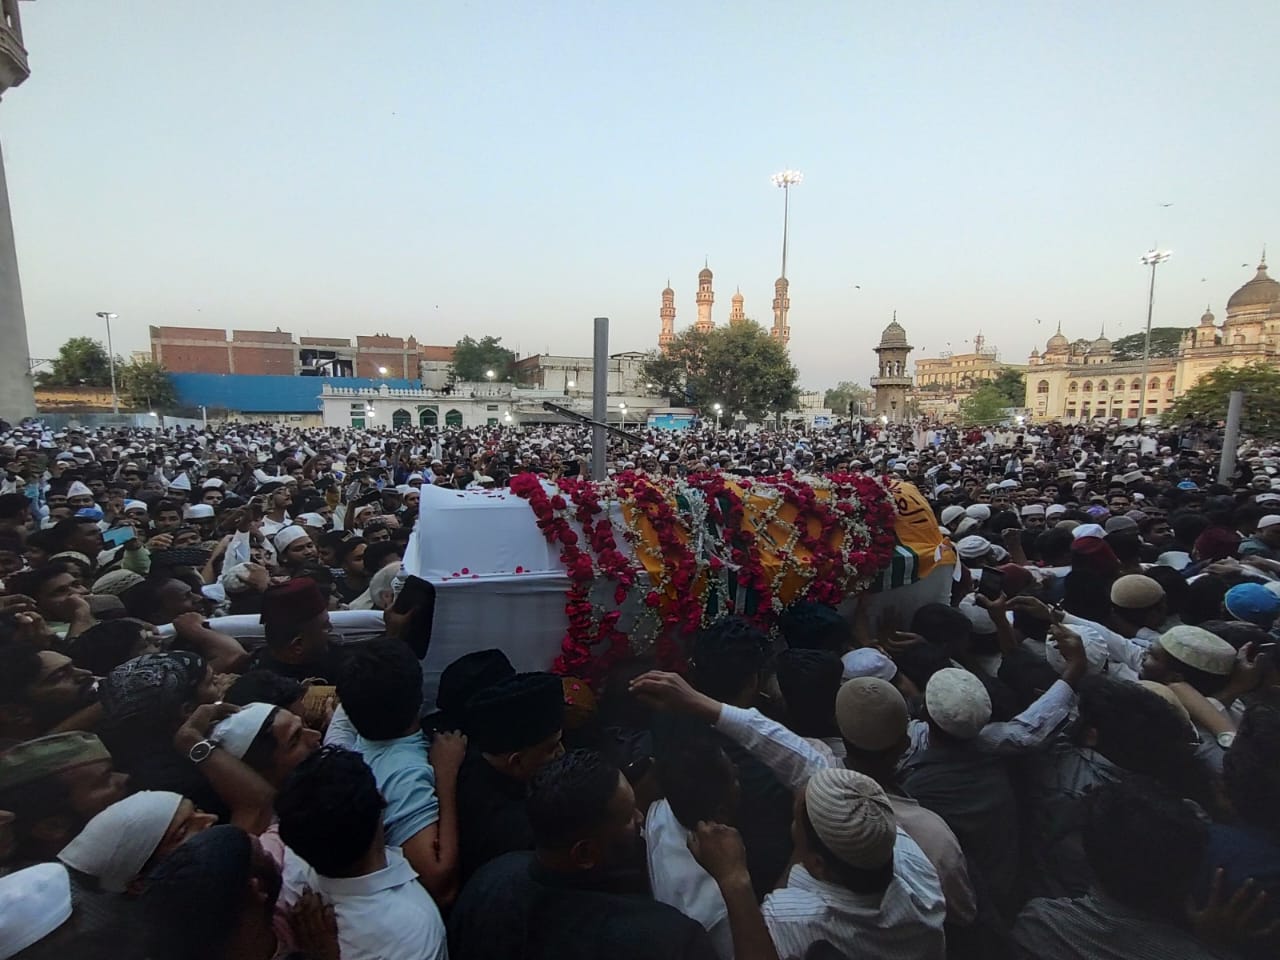 Hundreds of people turned out at the funeral of the last and 8th-titular Nizam of Hyderabad, Mukarram Jah.